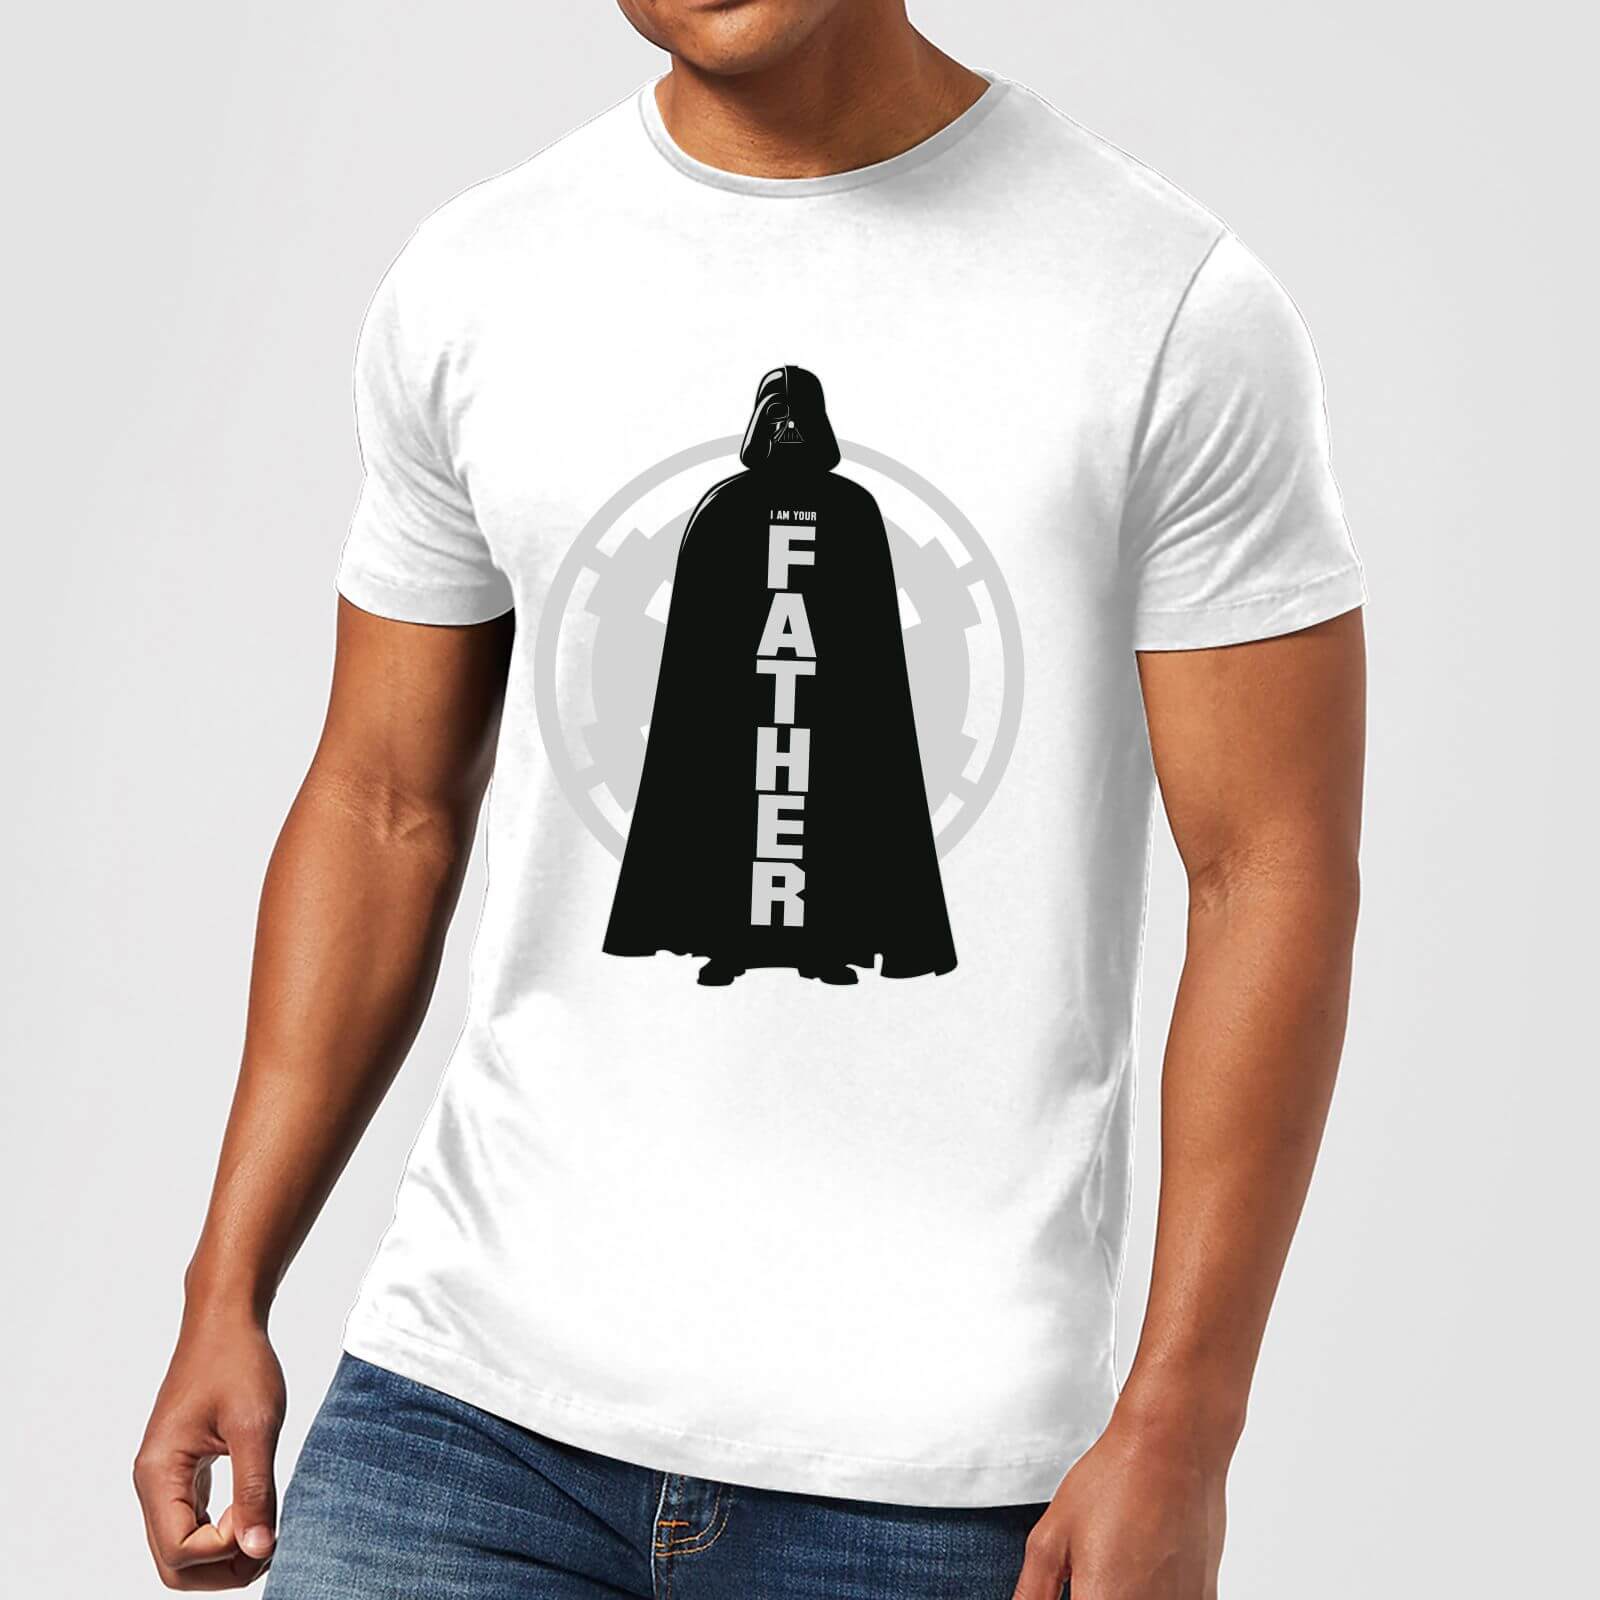 Star Wars Darth Vader Father Imperial Men's T-Shirt - White - 3XL - White